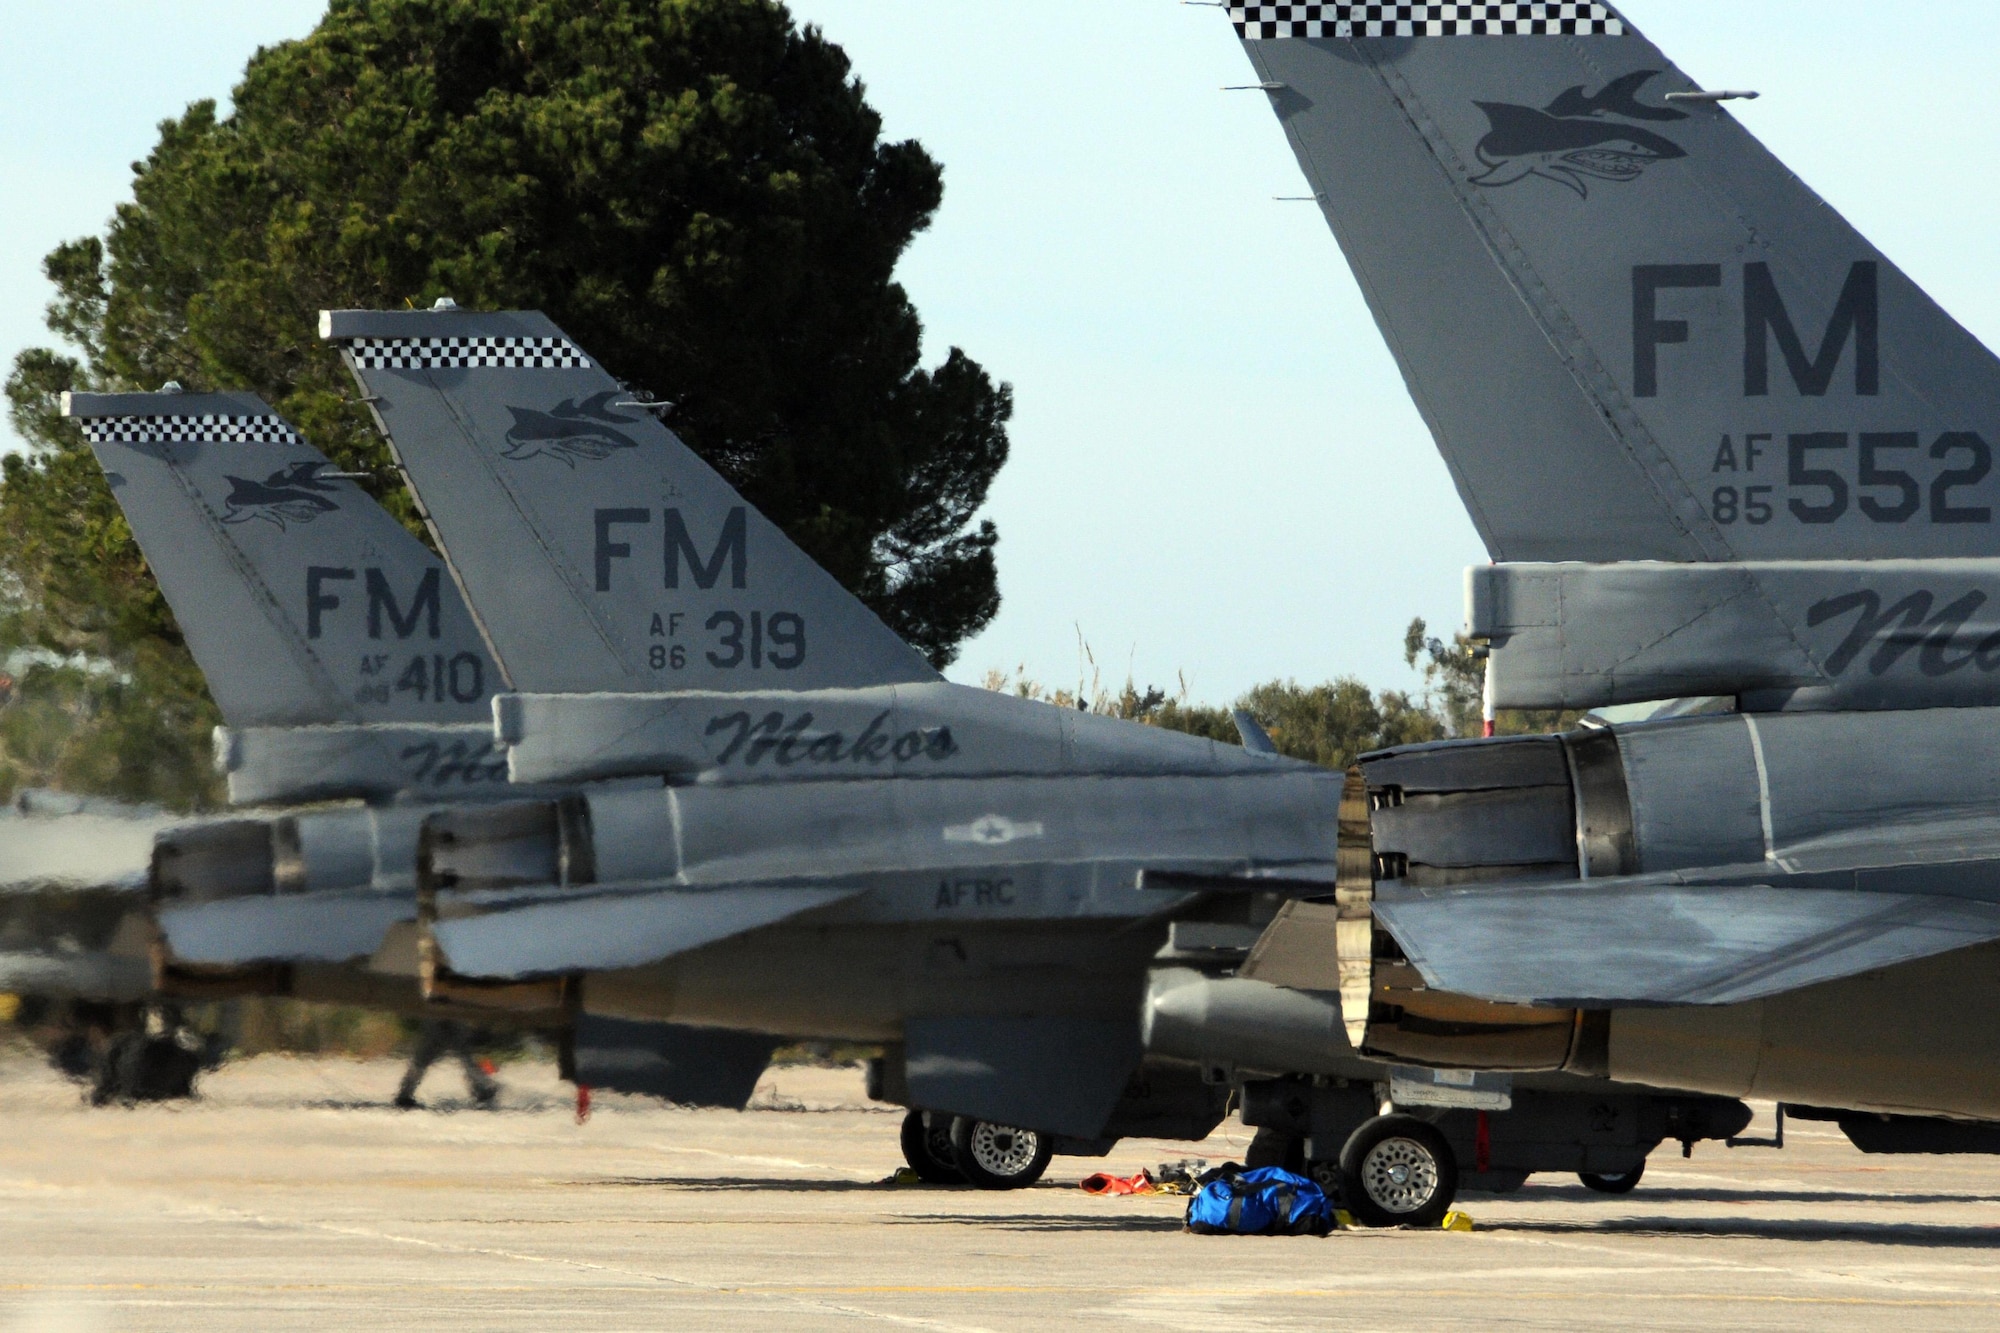 U.S. Air Force F-16Cs are parked on the flightline at Andravida Air Base Greece, Mar. 23, 2017 before the start of INIOHOS 17.  The U.S. and Greece, as NATO allies, are participating in the exercise to promote peace and stability, and to seek opportunities to continue developing a relationship. (U.S. Air Force photo by Staff Sgt. Ciara Gosier)